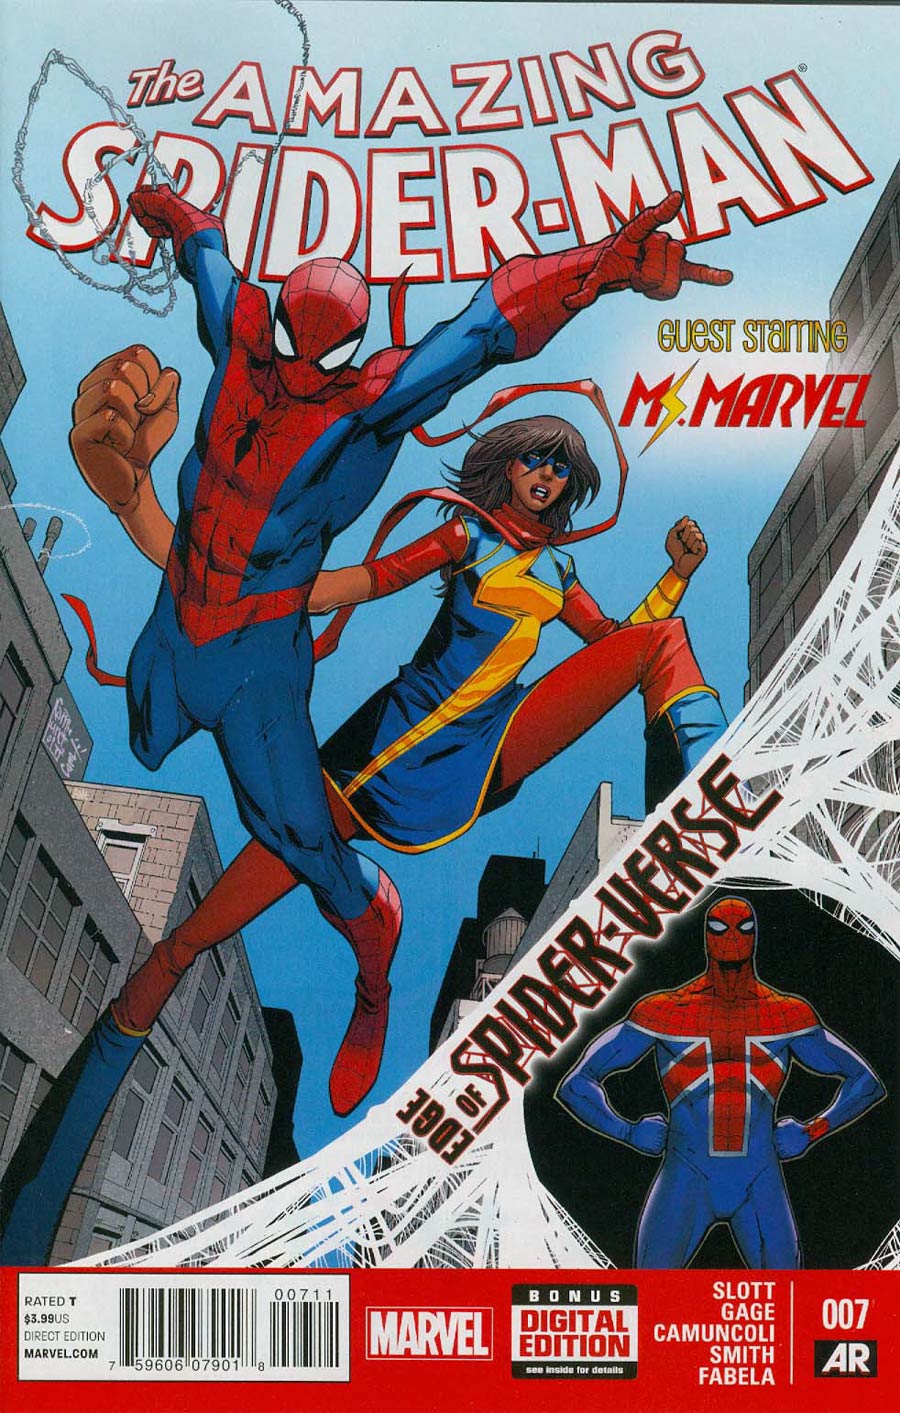 Amazing Spider-Man Vol 3 #7 Cover A Regular Giuseppe Camuncoli Cover (Edge Of Spider-Verse Tie-In)